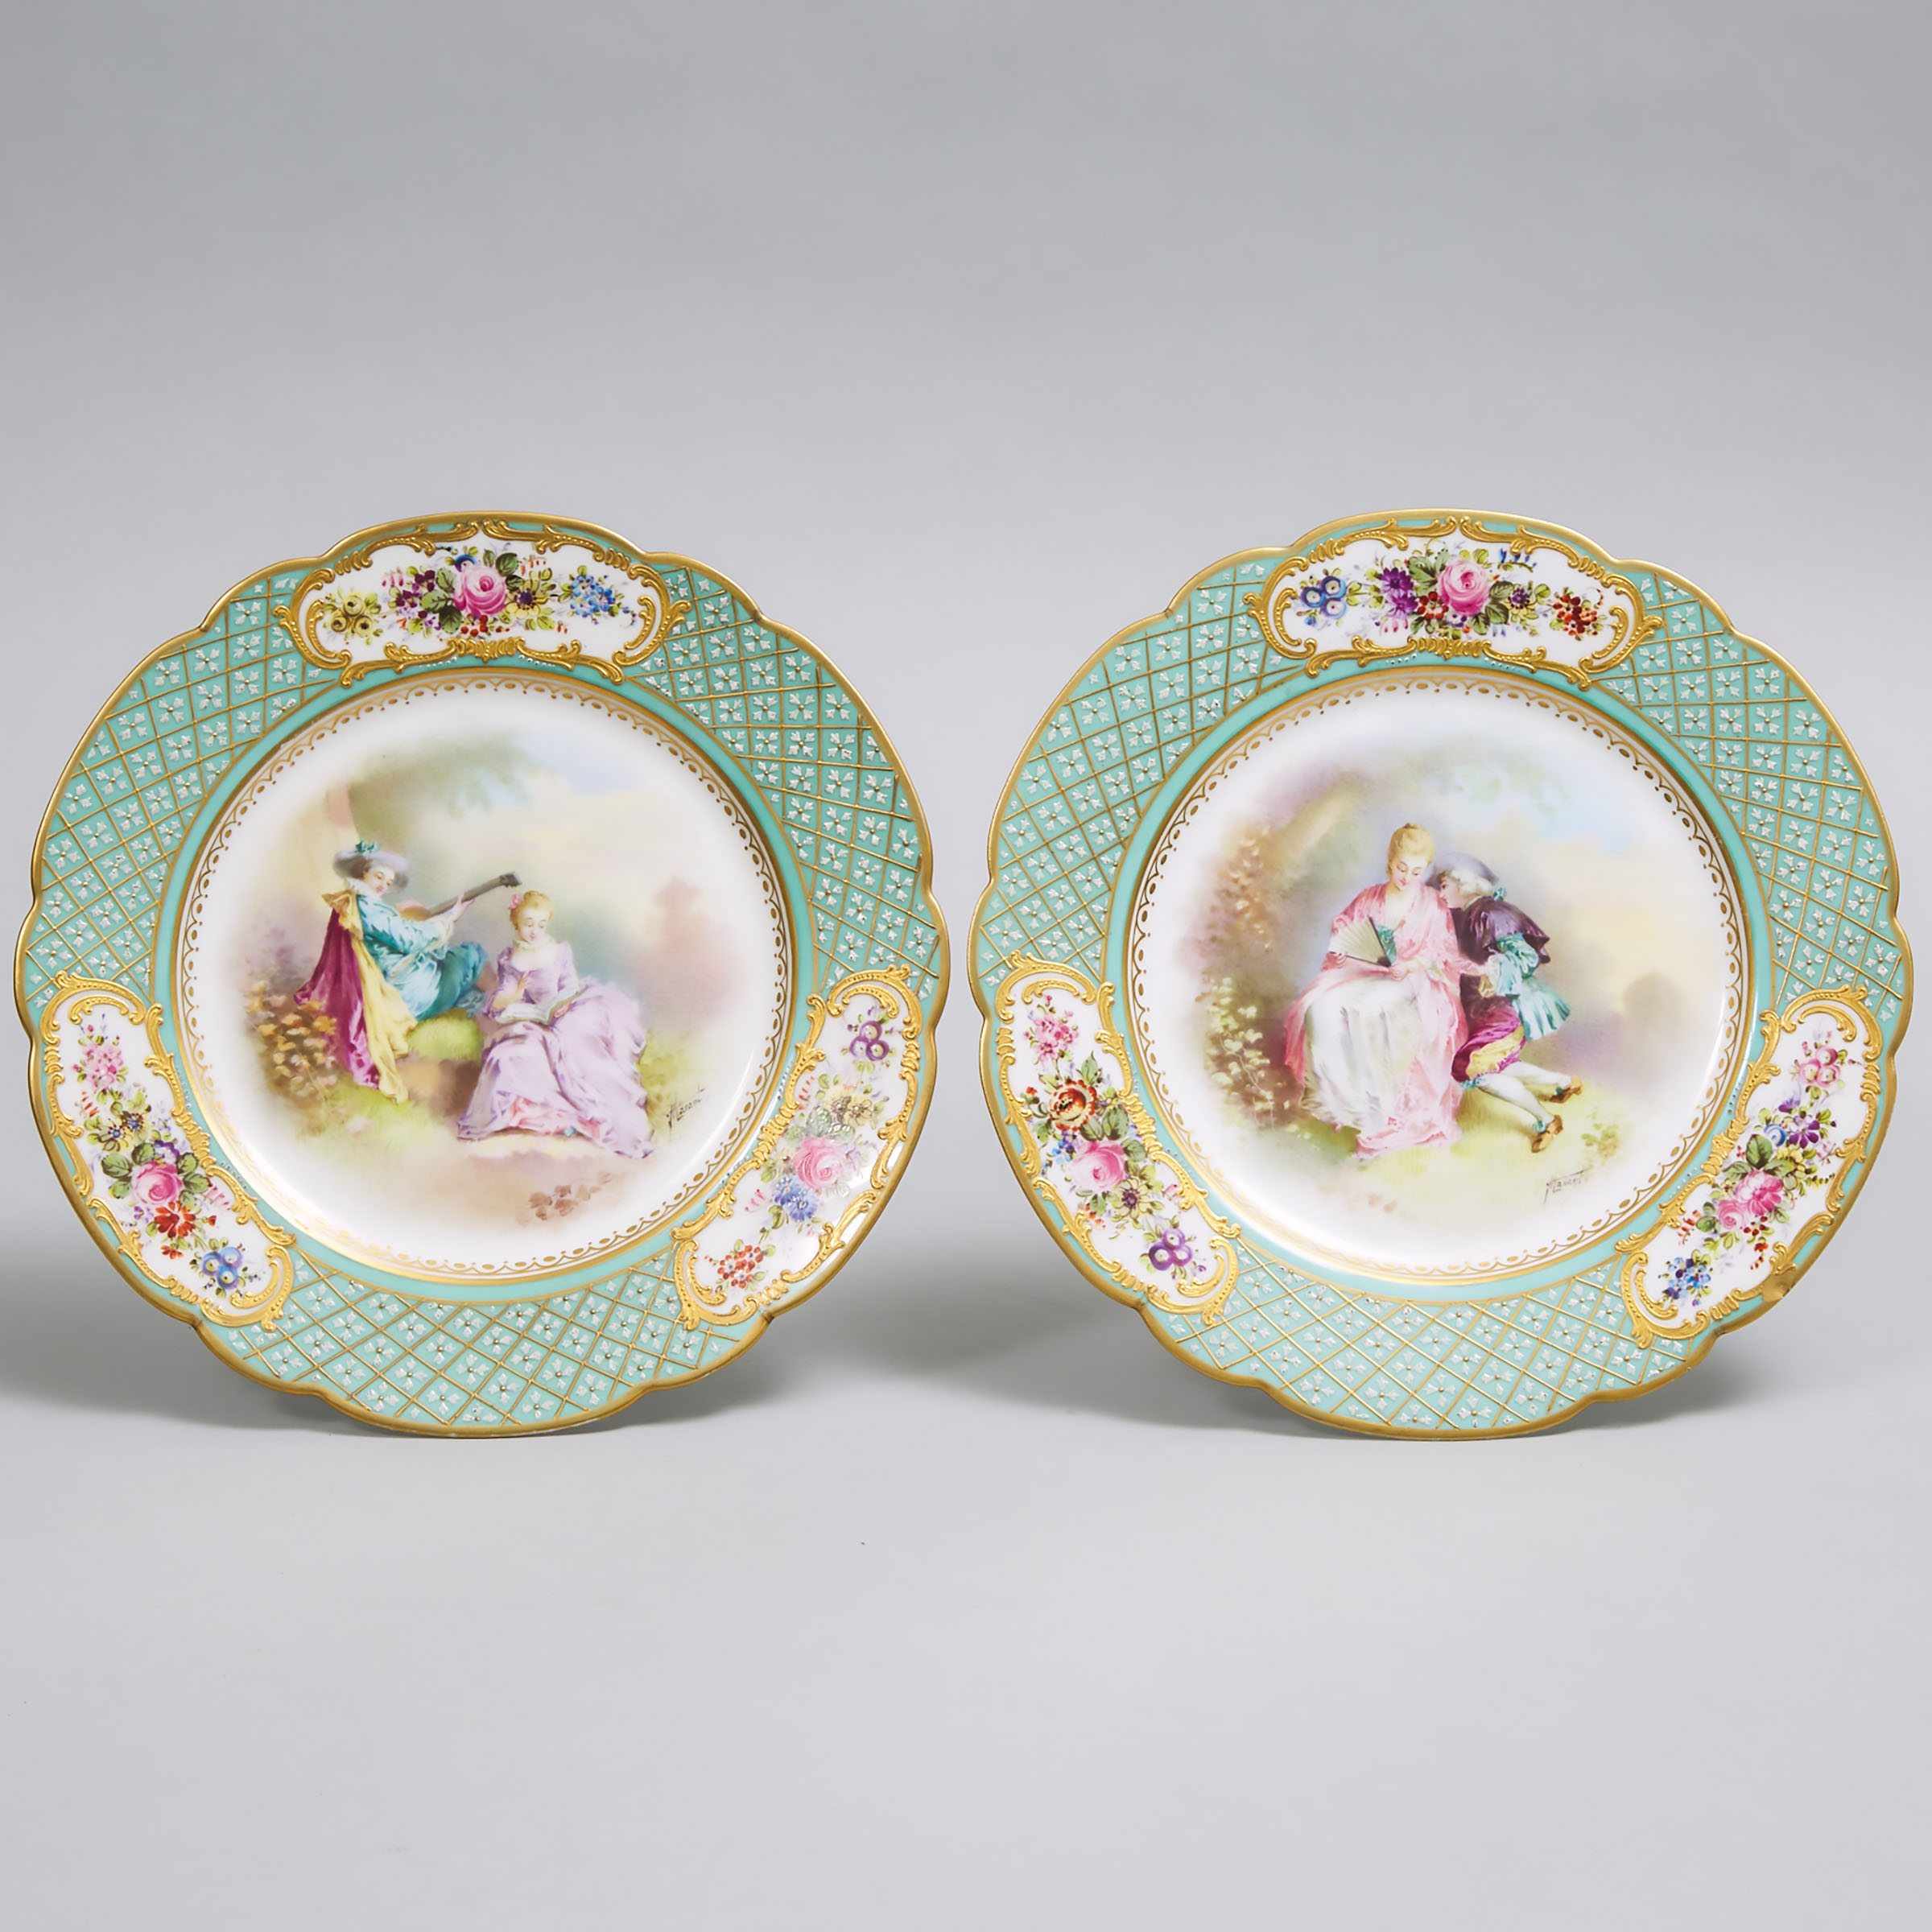 Pair of 'Sèvres' Plates, late 19th century